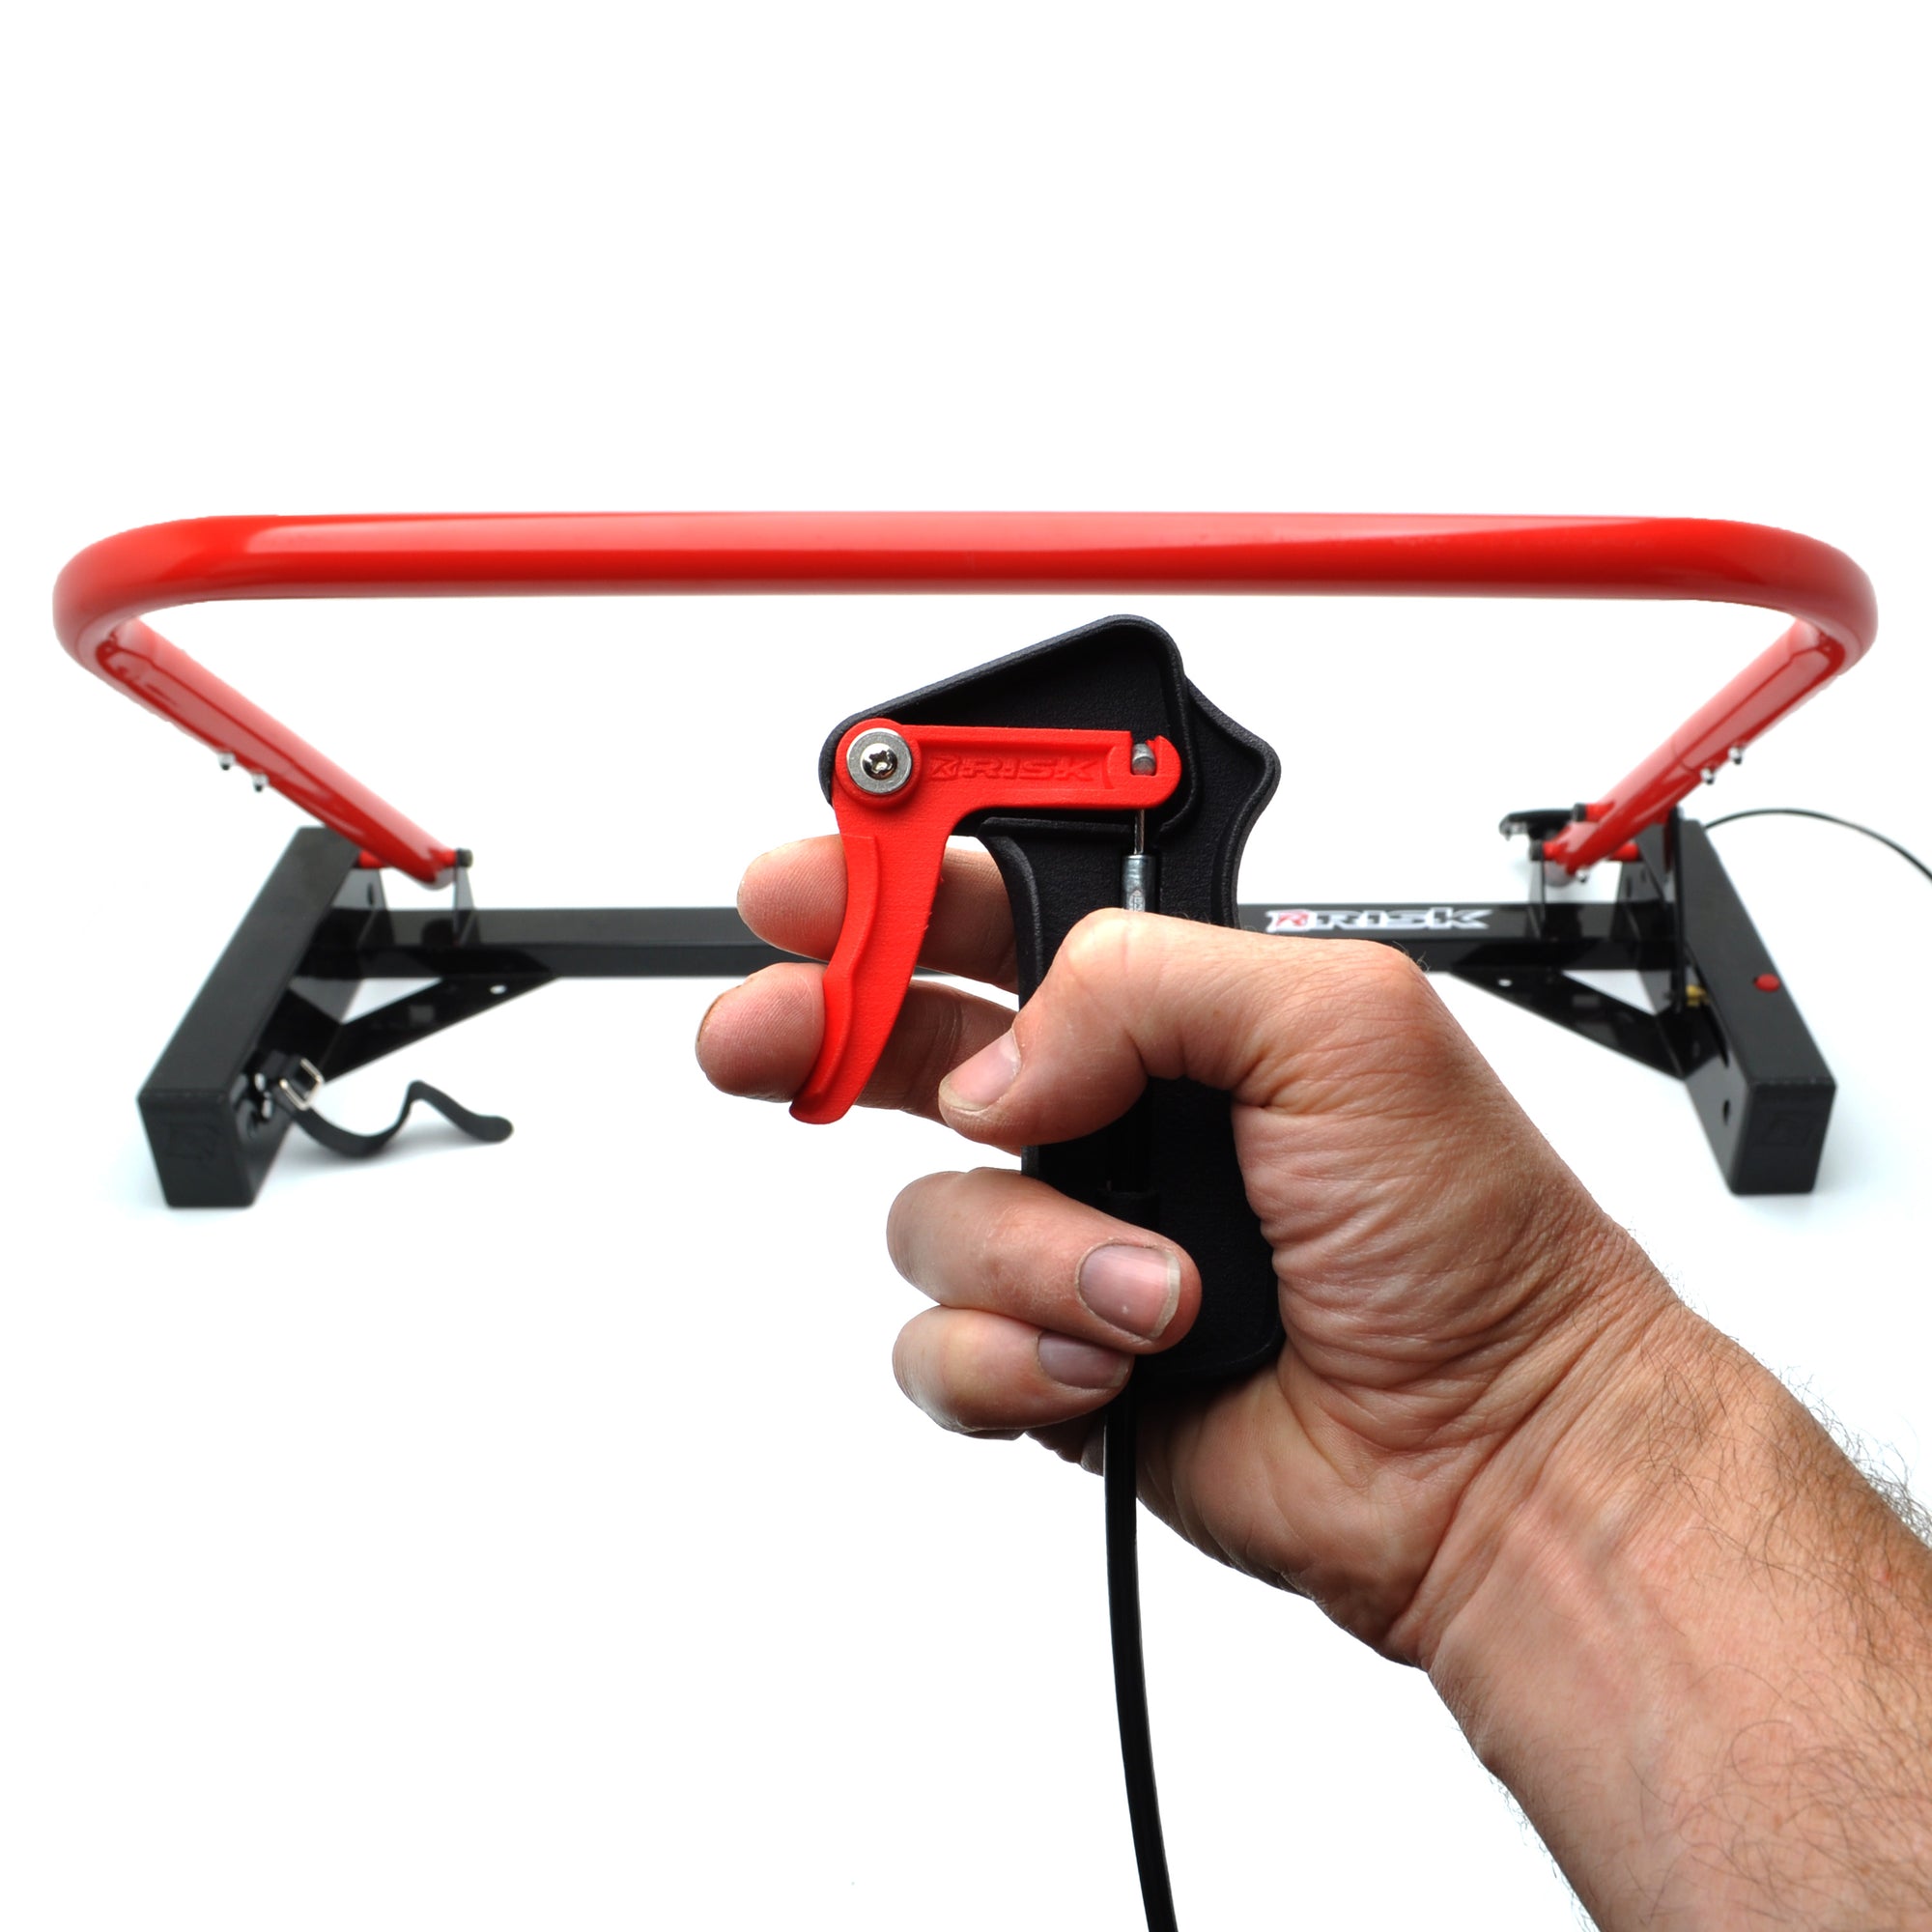 Holeshot Starting Gate Manual Version on a white studio background with a hand holding the trigger mechanism